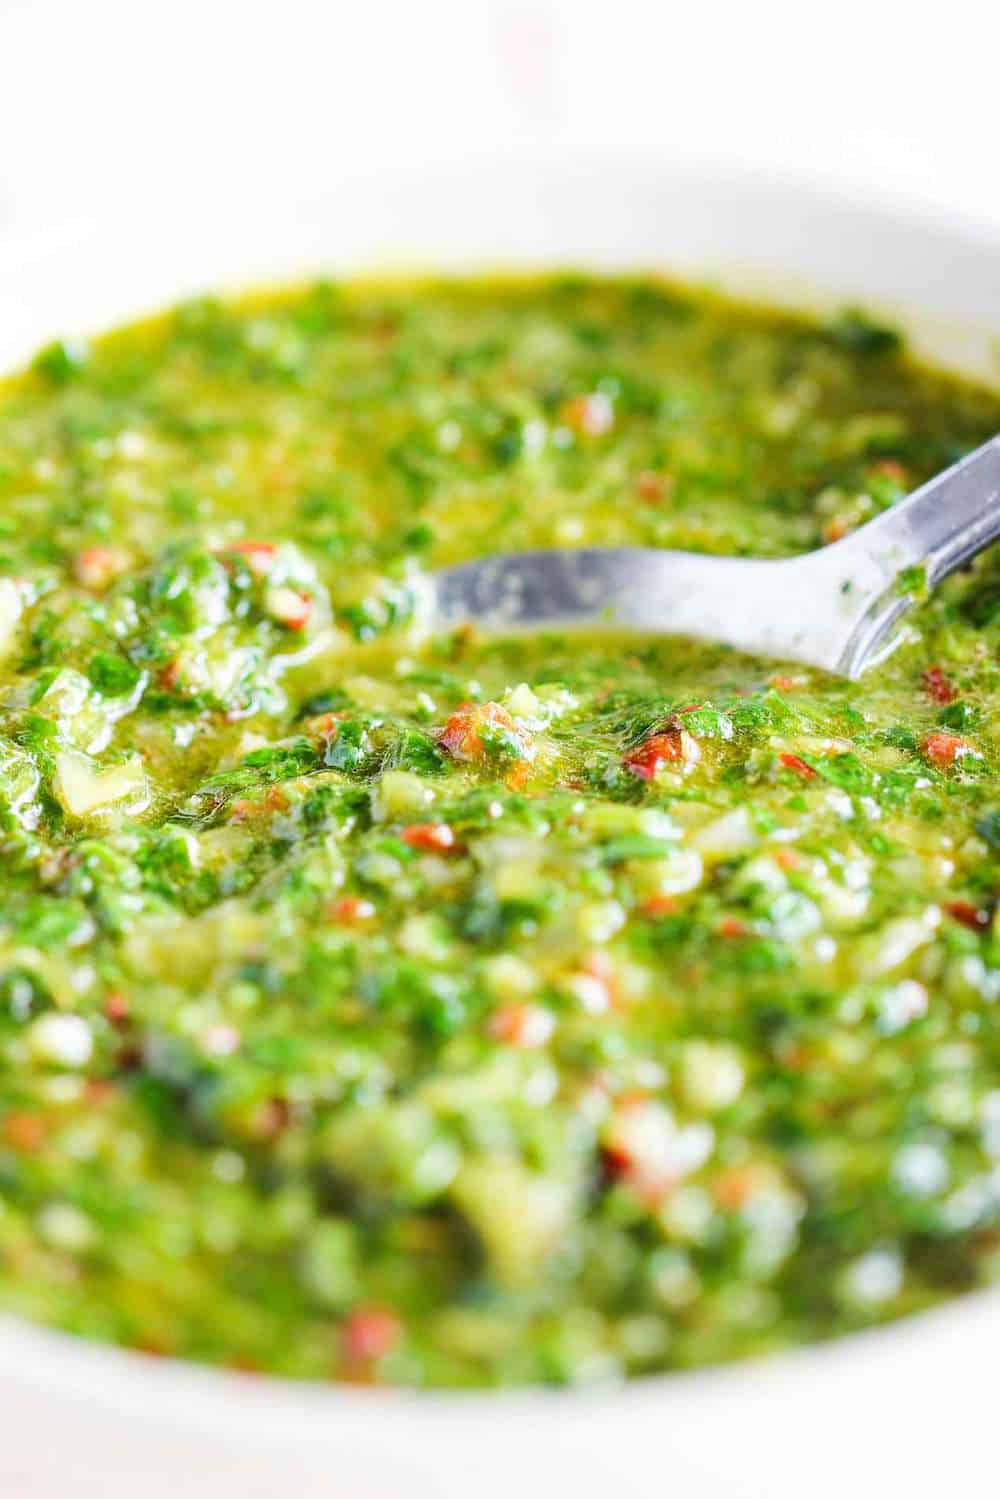 This chimichurri sauce is made with parsley, garlic, oregano, red wine vinegar and olive oil